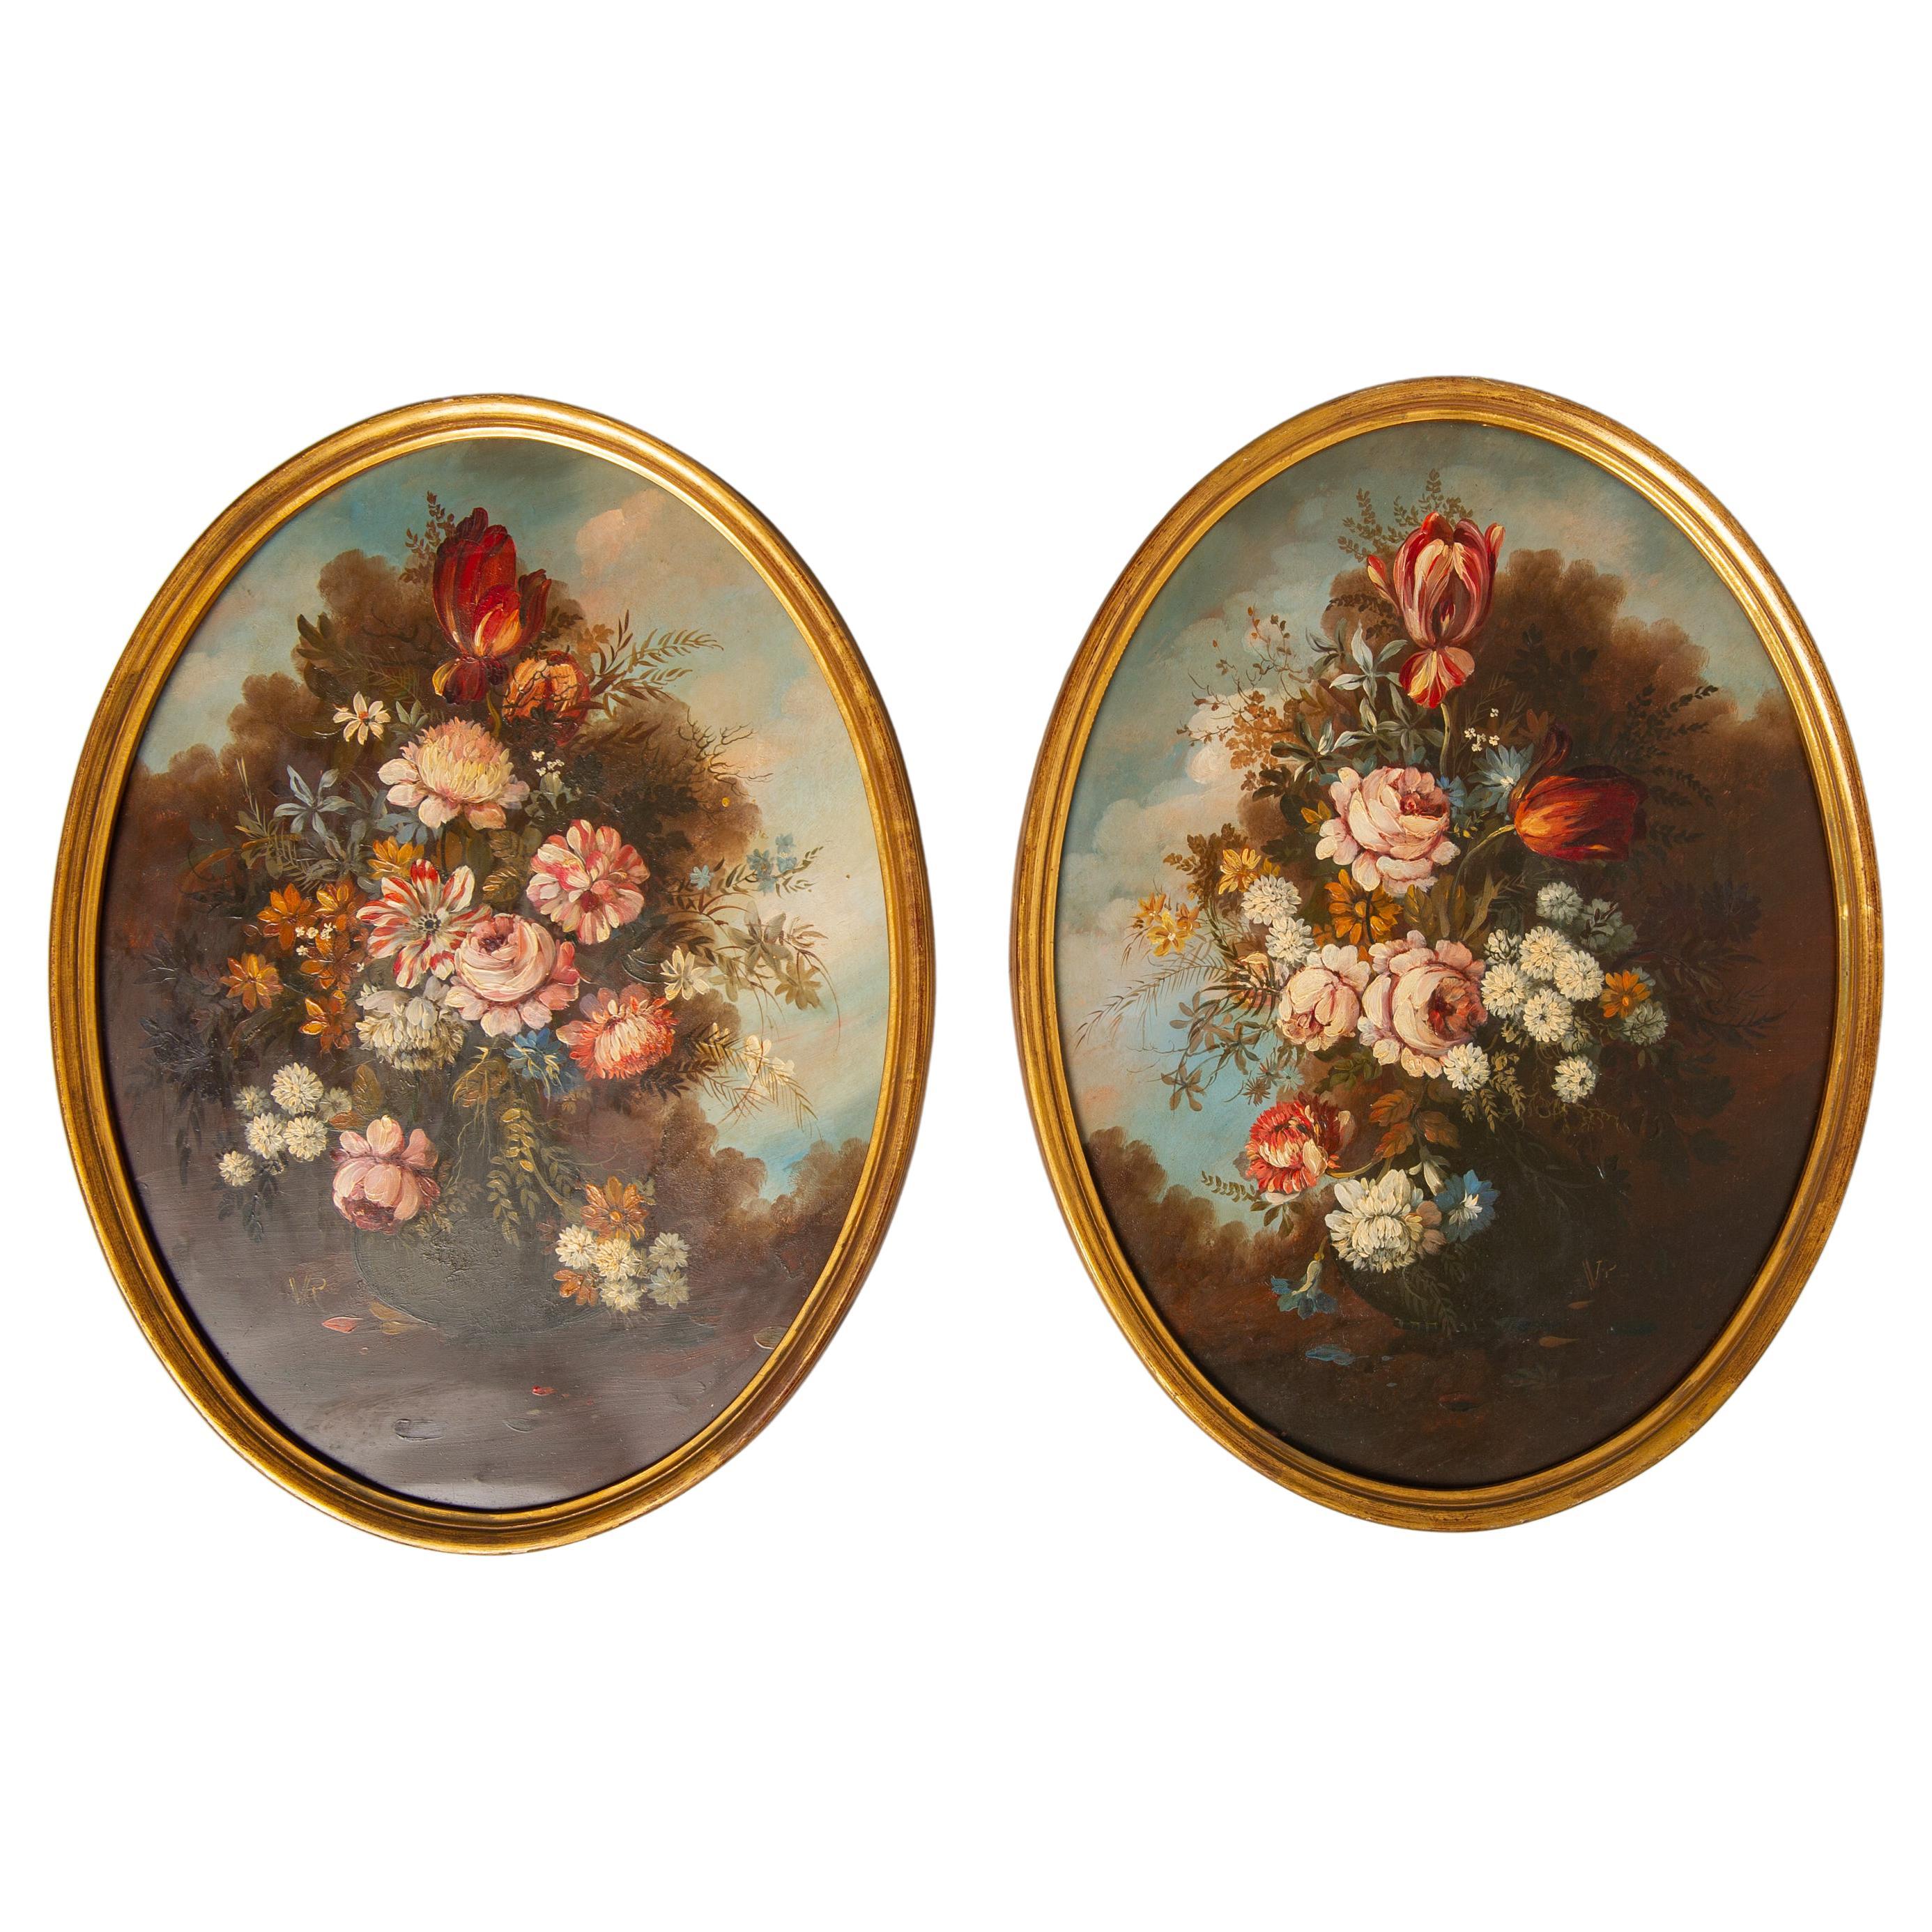 O/8272 - Italian school about 1920 - This pair of still life oil paintings depict flowers on copper are in their original frames.
They may seem from the eighteenth century, but they were painted on the early decades of the twentieth century by a